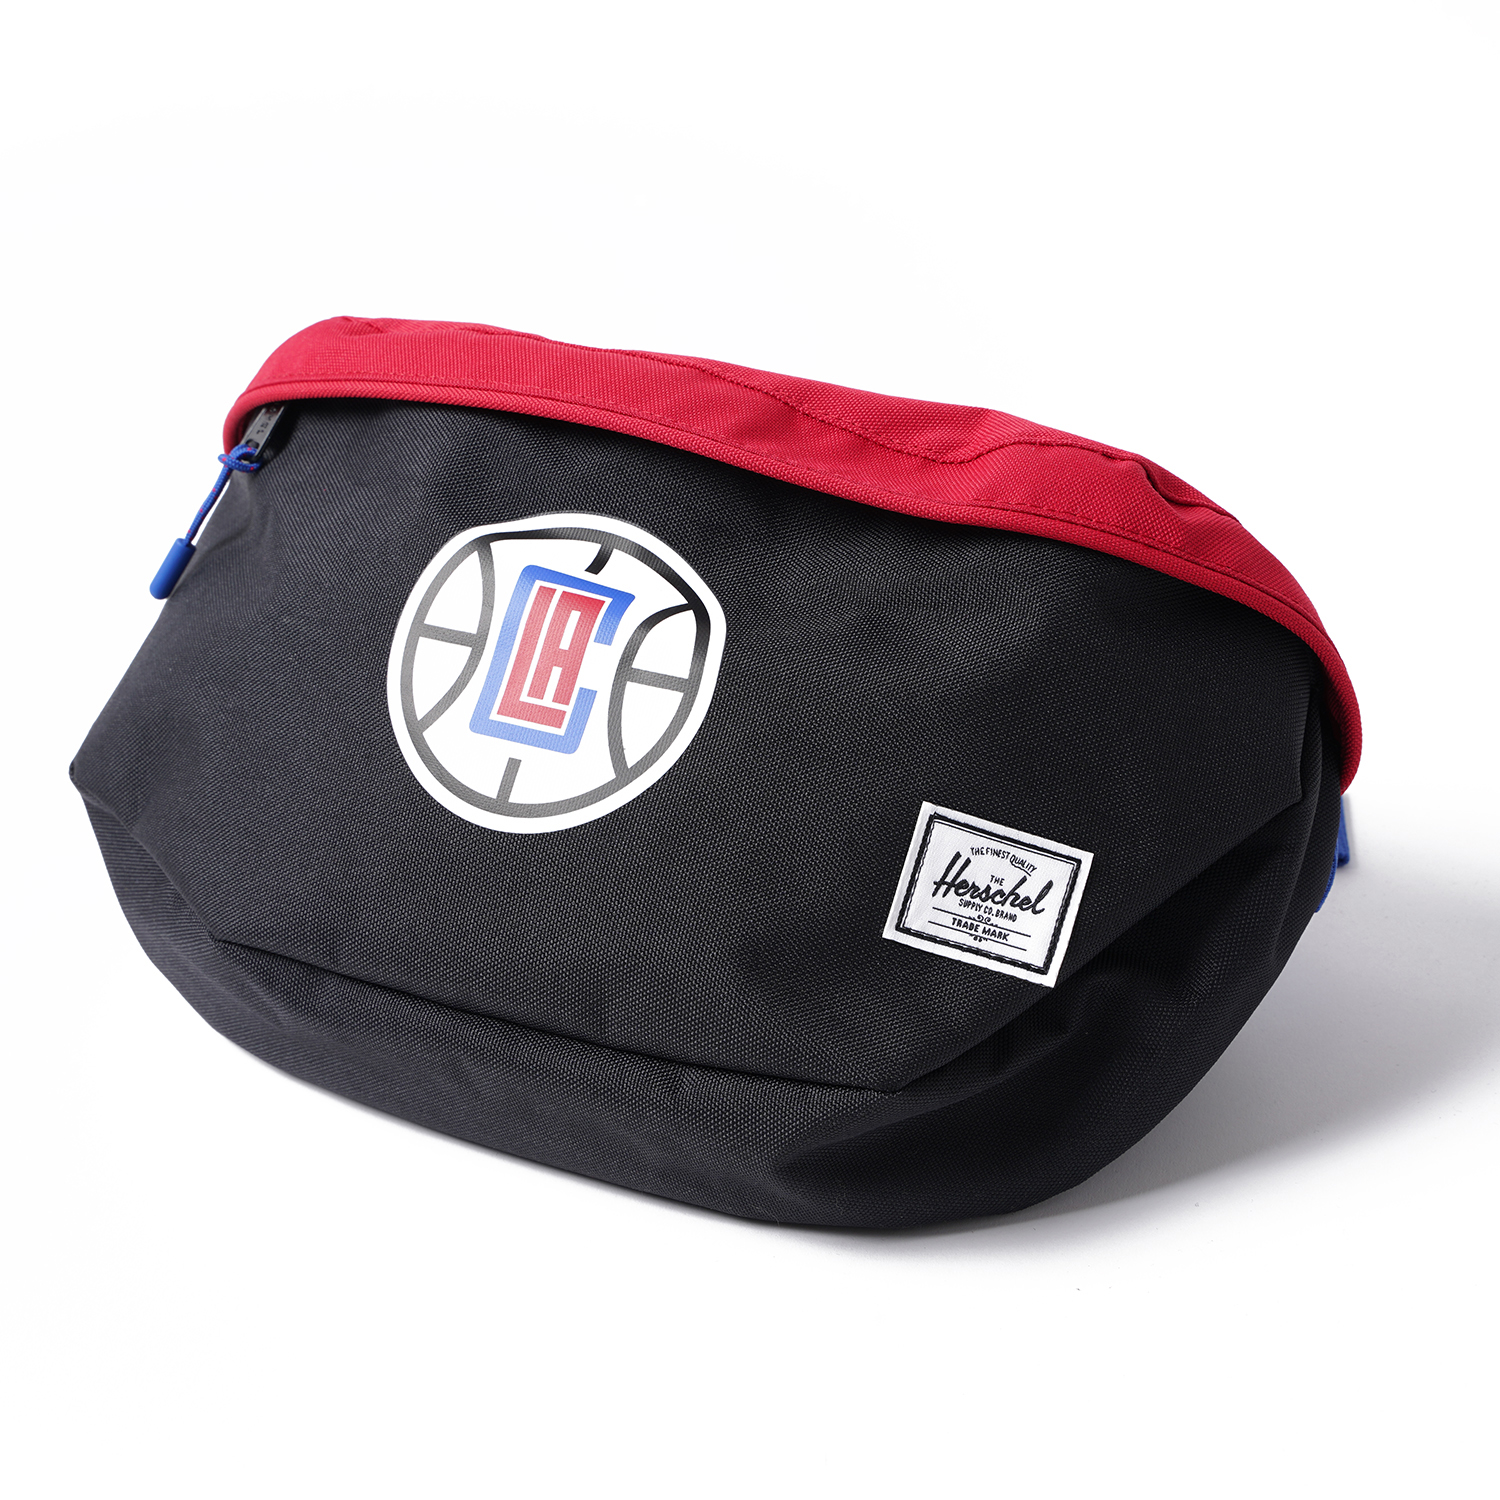 Herschel Sixteen Los Angeles Clippers Τσαντάκι Μέσης 10616-04172 BLACK/BLUE/RED